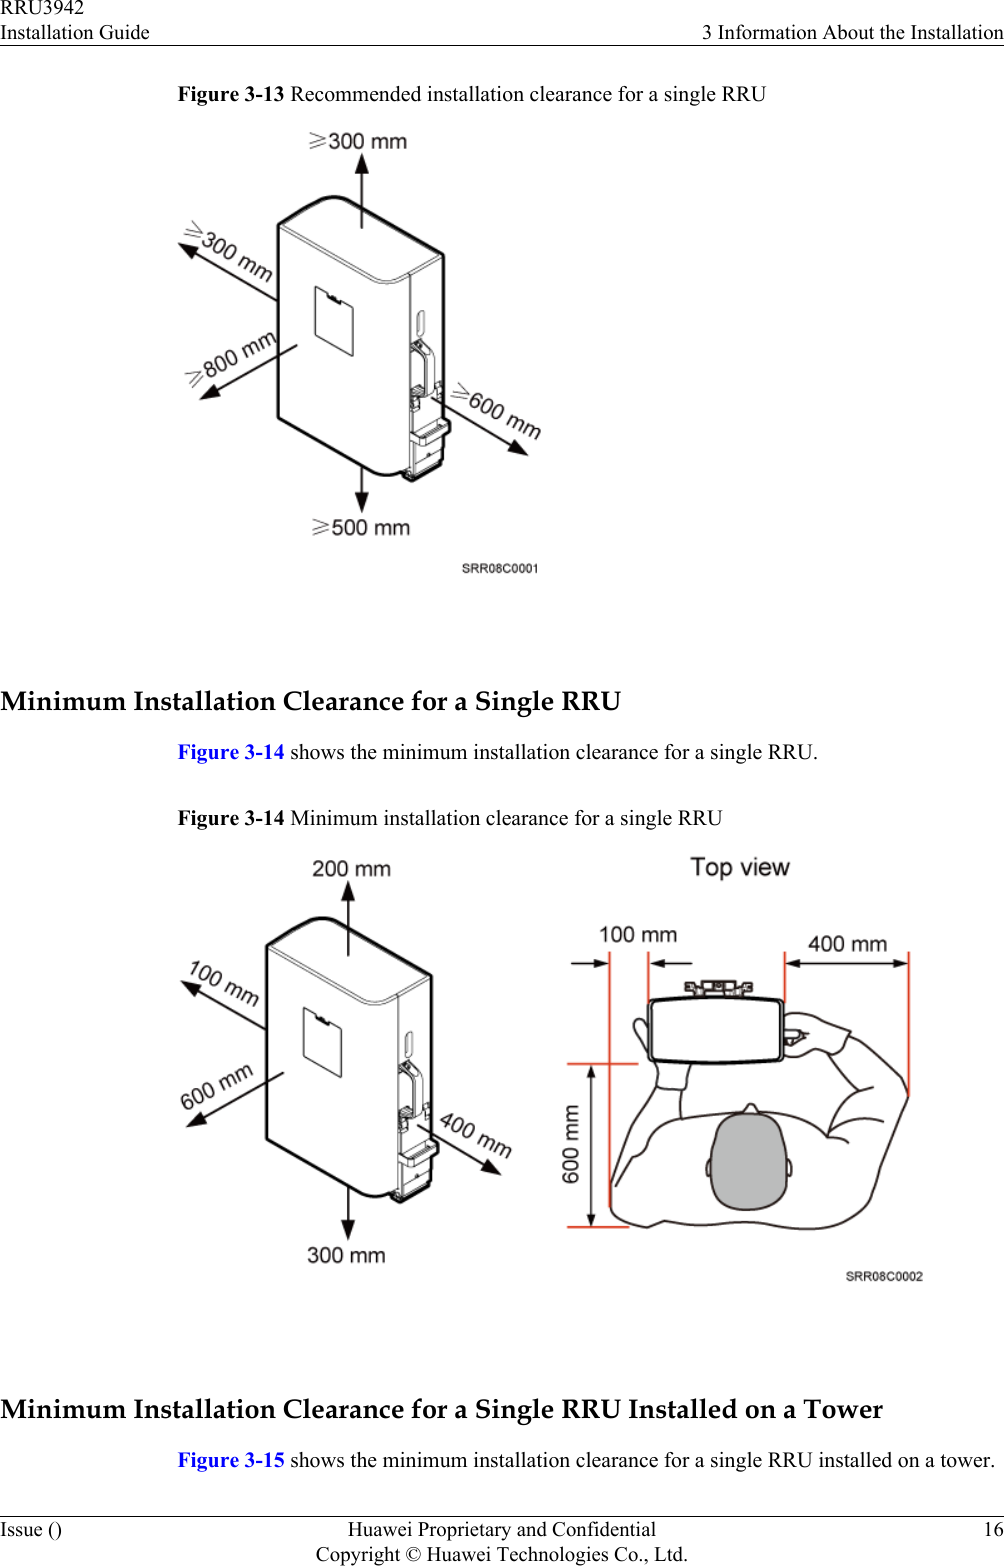 Figure 3-13 Recommended installation clearance for a single RRU Minimum Installation Clearance for a Single RRUFigure 3-14 shows the minimum installation clearance for a single RRU.Figure 3-14 Minimum installation clearance for a single RRU Minimum Installation Clearance for a Single RRU Installed on a TowerFigure 3-15 shows the minimum installation clearance for a single RRU installed on a tower.RRU3942Installation Guide 3 Information About the InstallationIssue () Huawei Proprietary and ConfidentialCopyright © Huawei Technologies Co., Ltd.16